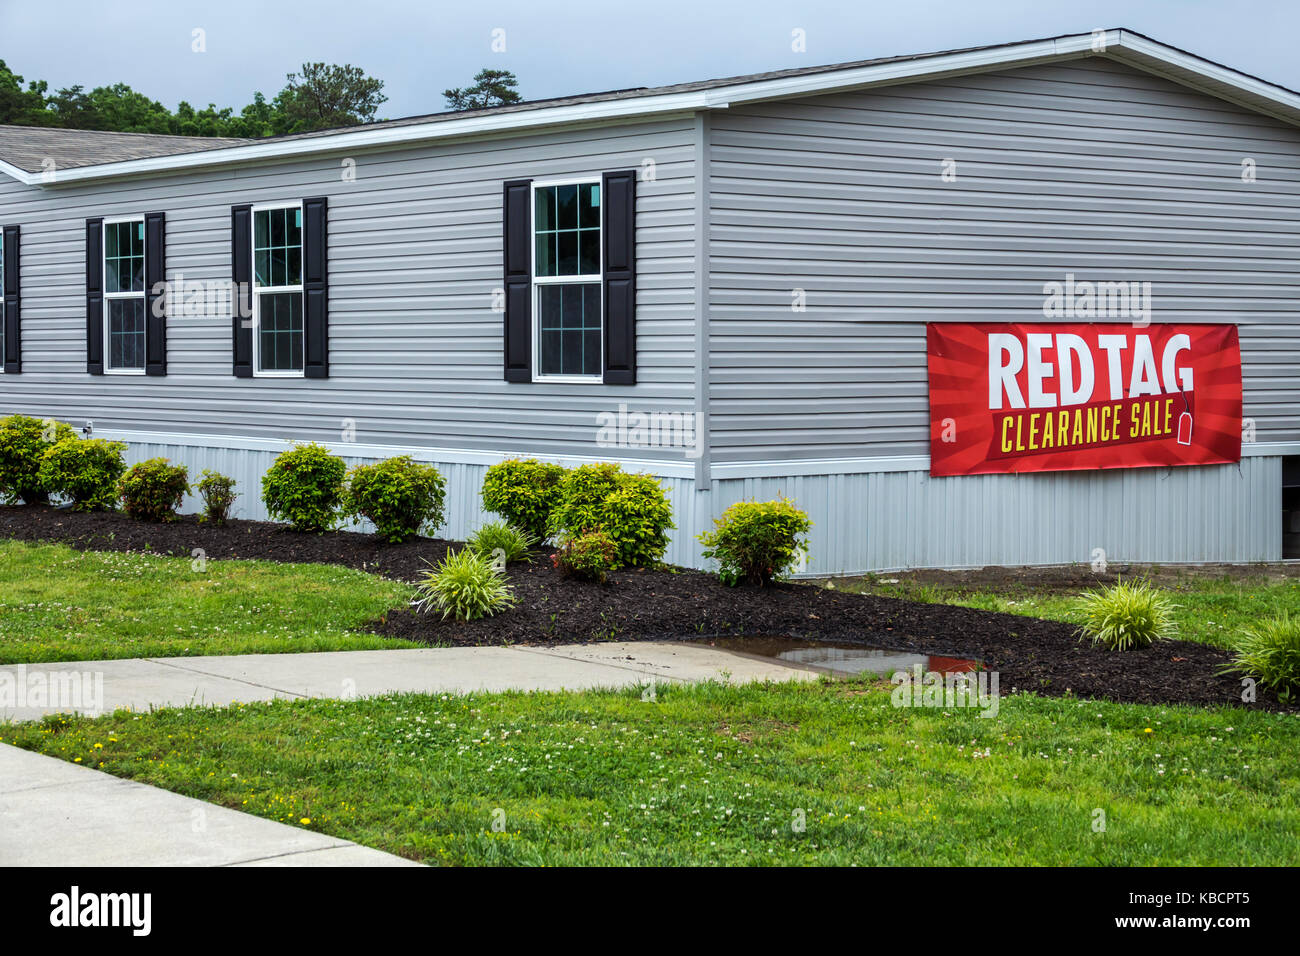 Fredericksburg Virginia,Clayton Homes,manufactured houses,modular homes,for sale,sign,zero down,red tag clearance sale,promotion,VA170523062 Stock Photo